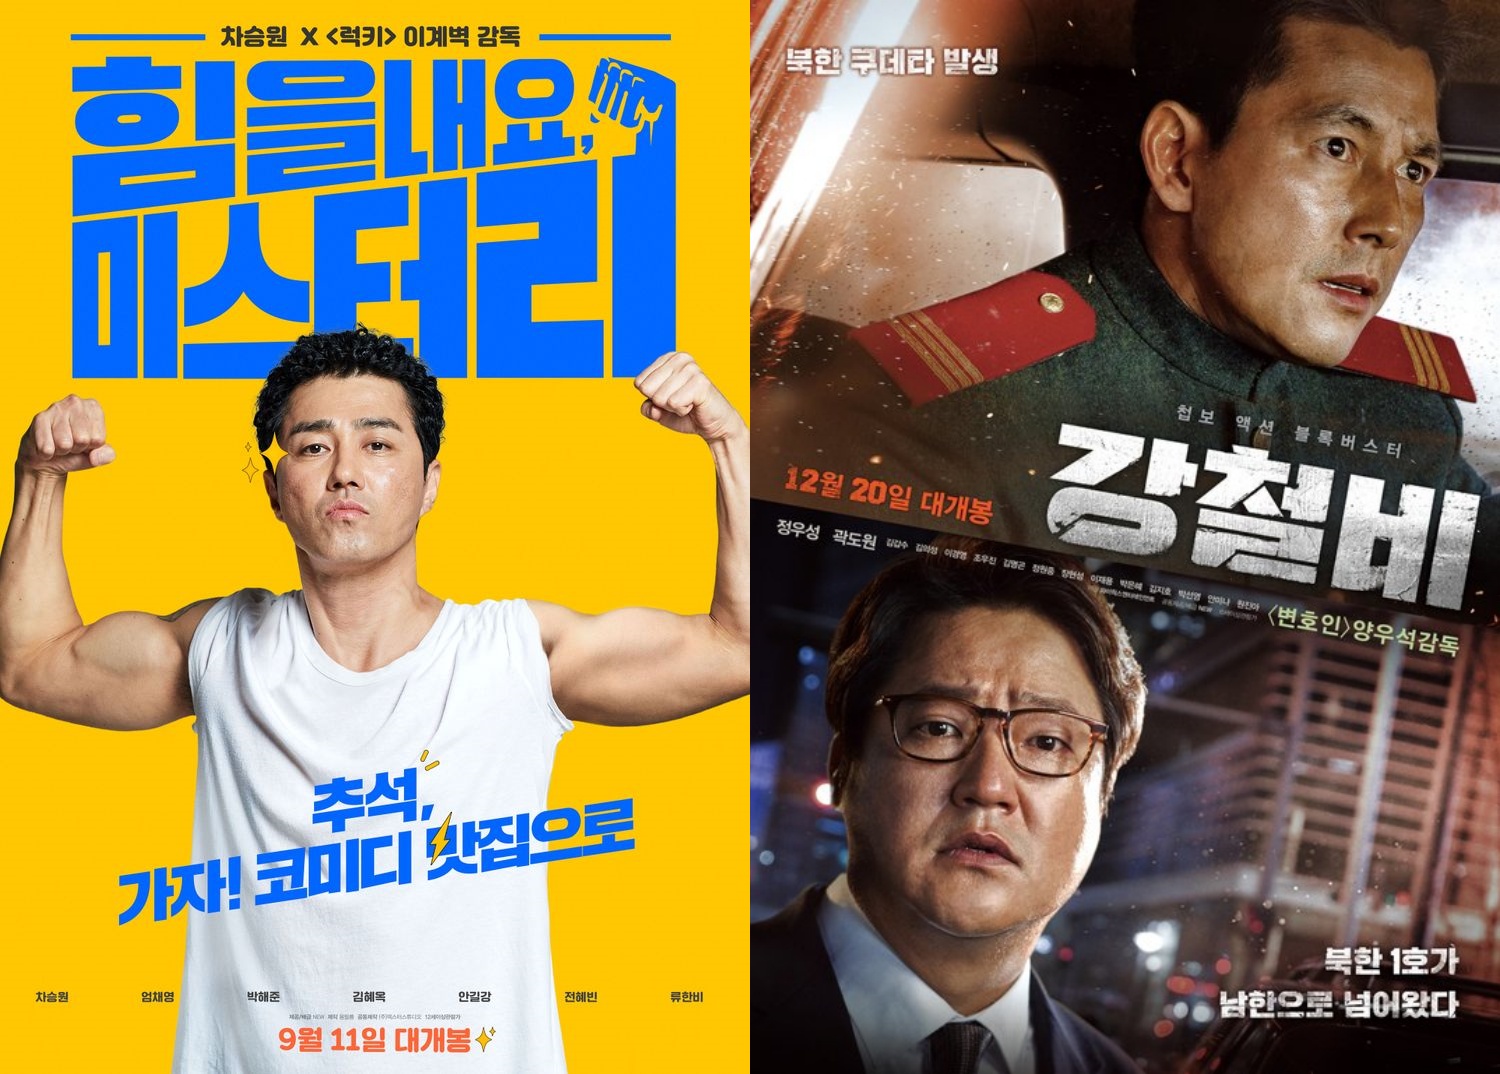 JTBC will broadcast Strengthening, Mr. Lee and Steel Rain in succession as Chuseok special films.On the first day, JTBC will air the movie Get Power, Mr. Lee from 8:50 pm.The movie The Mystery, the Mystery, released in September last year, is a story about the story of a child-like daughter (Um Chae-young) appearing in front of him, who is more like a child than a child, in front of him (Cha Seung-won), a beautiful figure of the heart-kung visuals that stops the way he was going.Get strong, Mr. Lees running time was 111 minutes, with a cumulative audience of 1,168,283.At 11 pm on the same day, the movie Steel Rain starring Jung Woo-sung and Kwak Do-won will be broadcast.The film Steel Rain, released in 2017, is an intelligence action film depicting the conflicts and political situations of secret agents from the two Koreas.The storyline of Steel Rain is a film about the biggest crisis on the Korean peninsula that takes place one day before the Christmas of the near future, when North Koreas power No. 1 and Jung Il-won, Um Chul-woo (Jung Woo-sung) fled to South Korea.The running time of Steel Rain was 139 minutes, and the cumulative number of audiences was 4,452,755.iMBC Cha Hye-rin  Photos